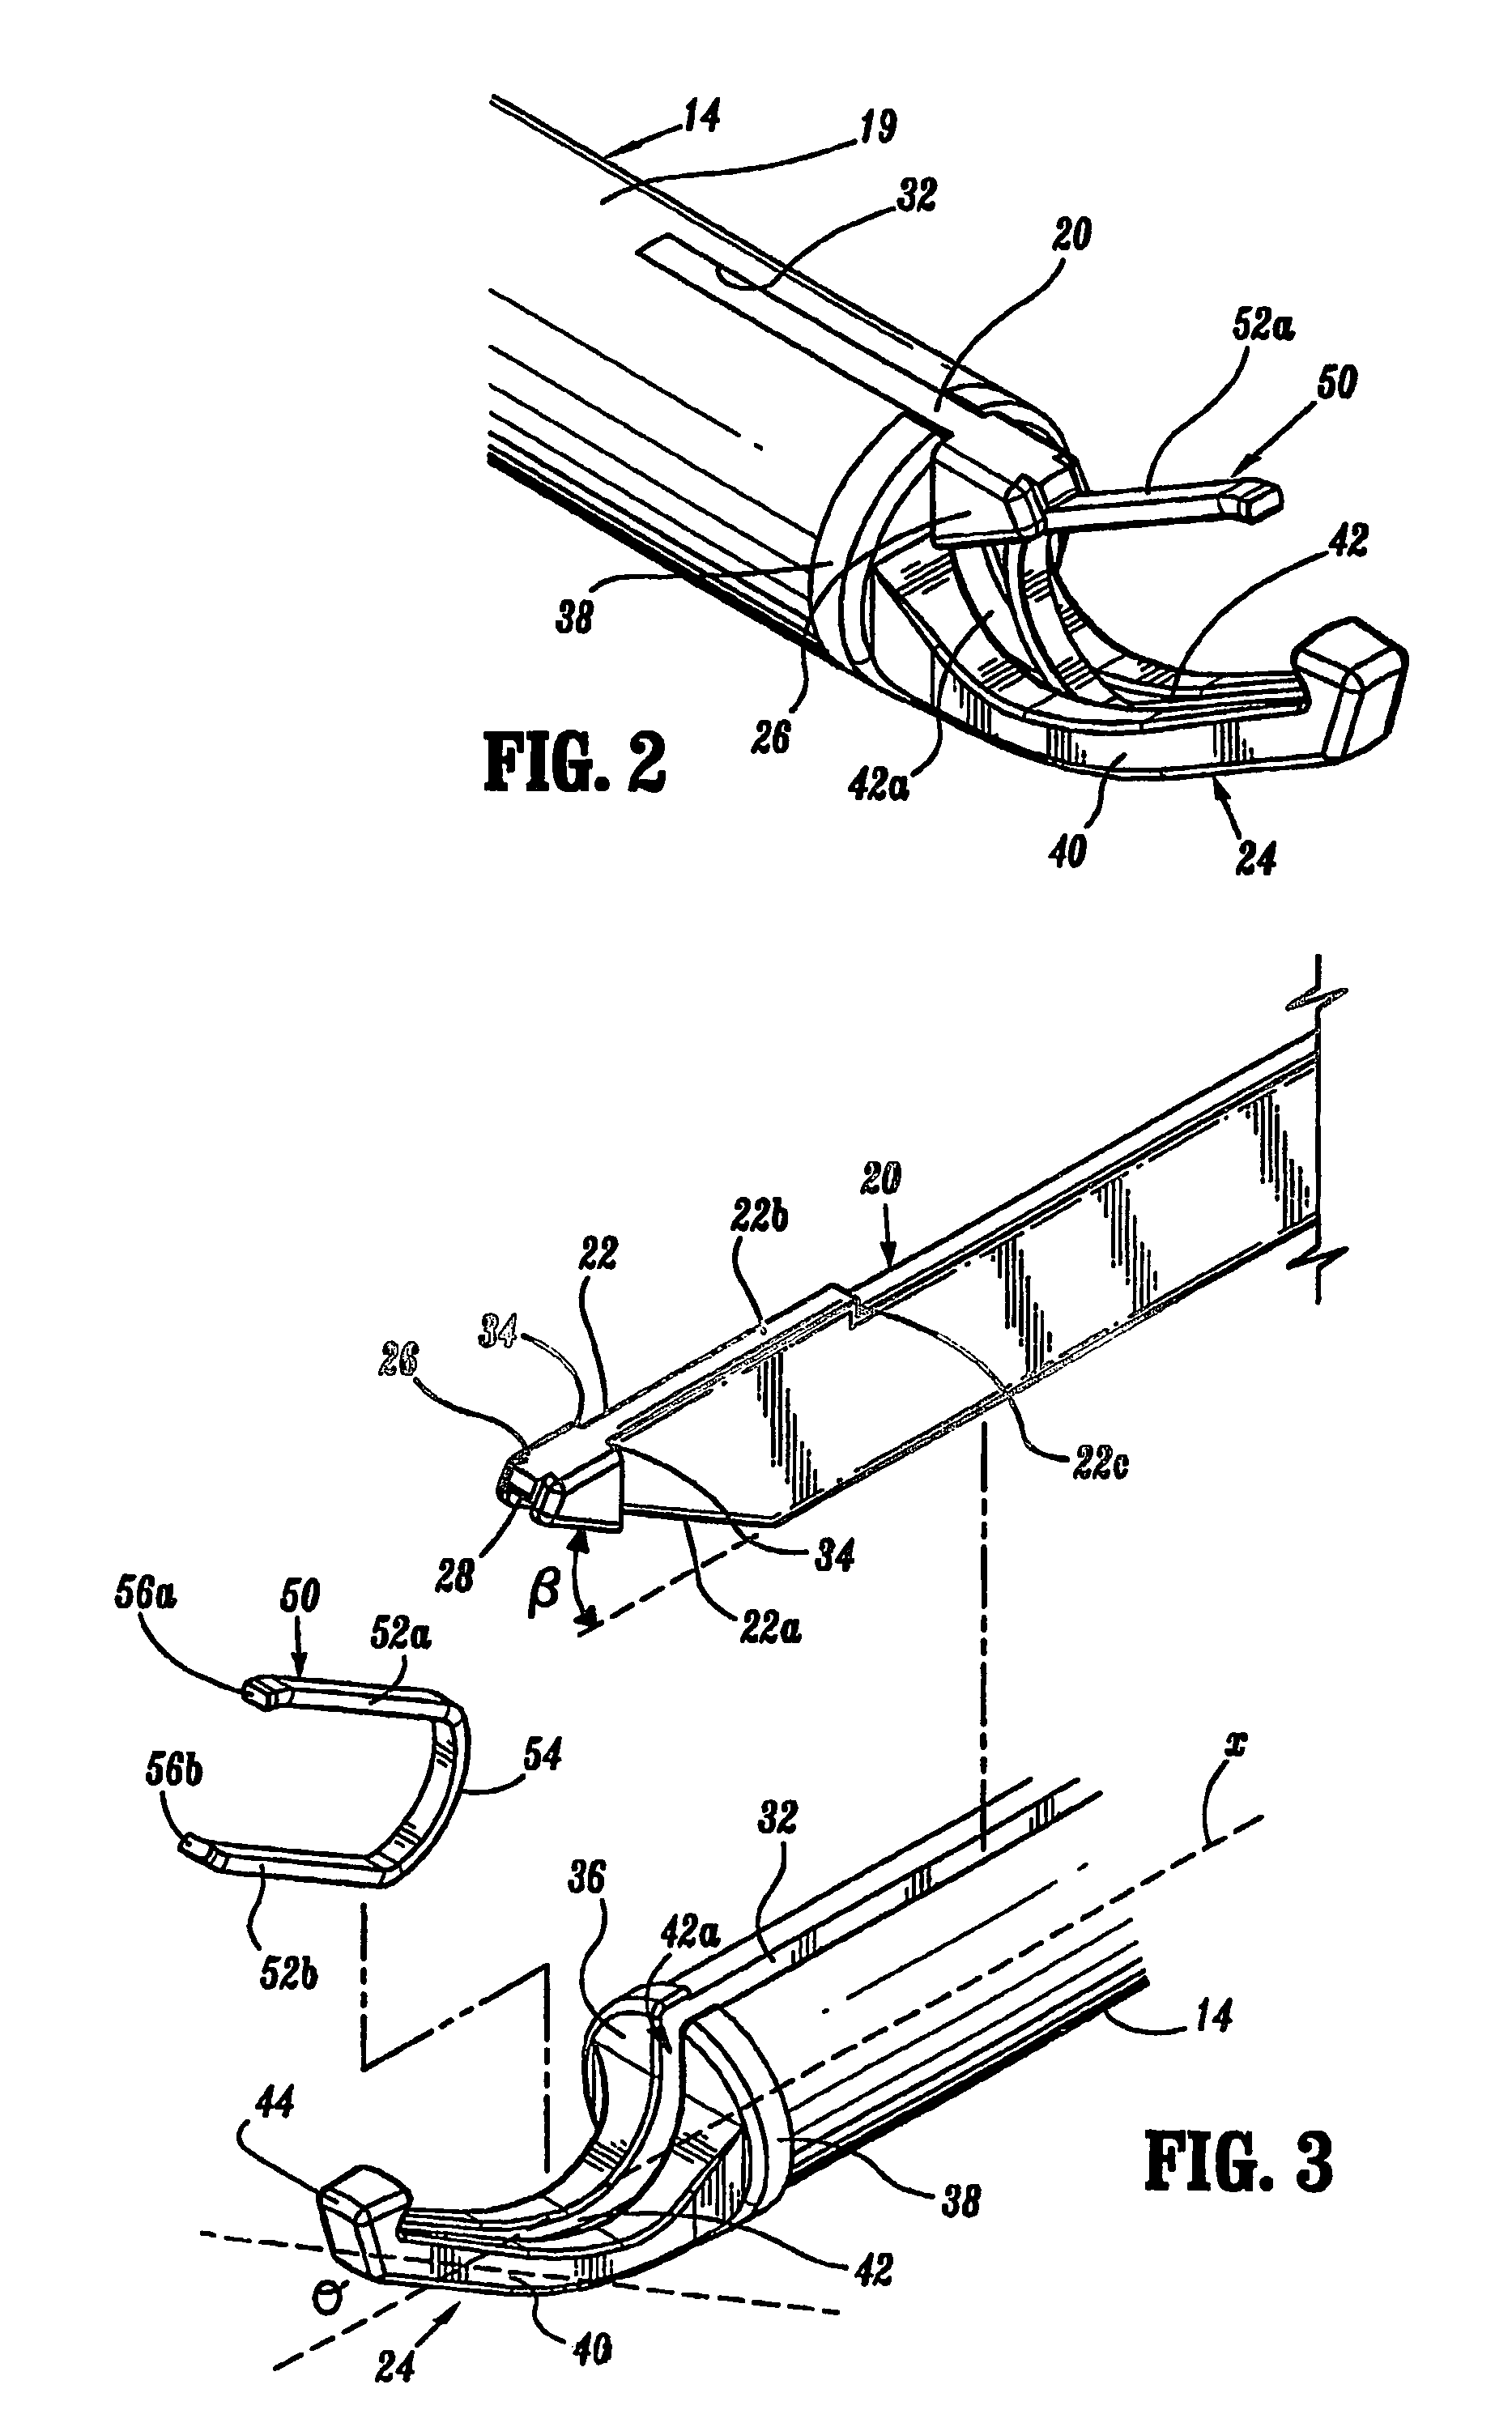 Clip applying apparatus with angled jaw